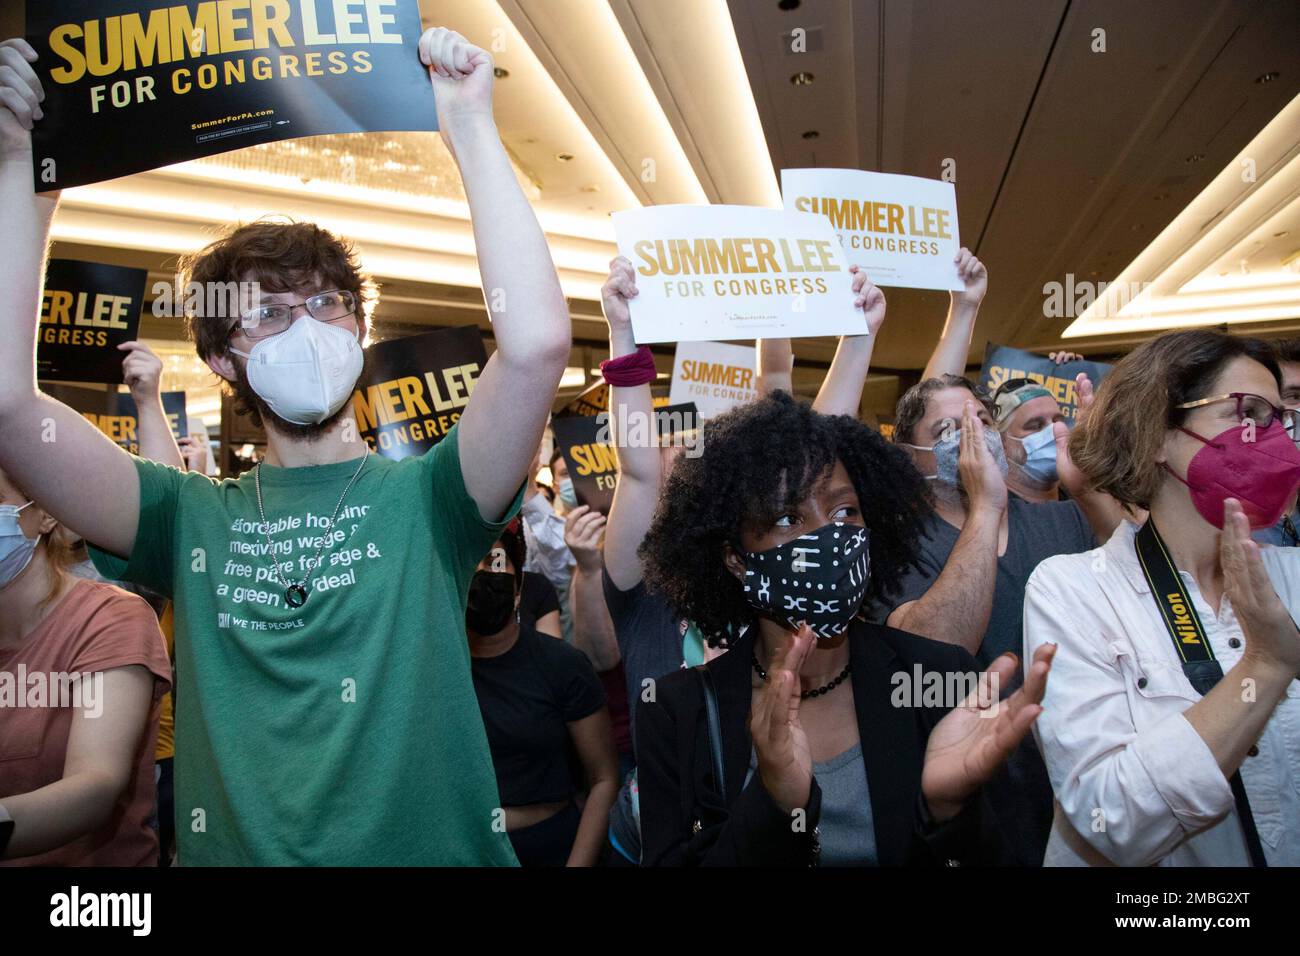 The crowd cheers in support of state Rep. Summer Lee, who is seeking the  Democratic Party nomination for Pennsylvania's 12th District .  Congressional district, during a campaign event where Sen. Bernie Sanders,